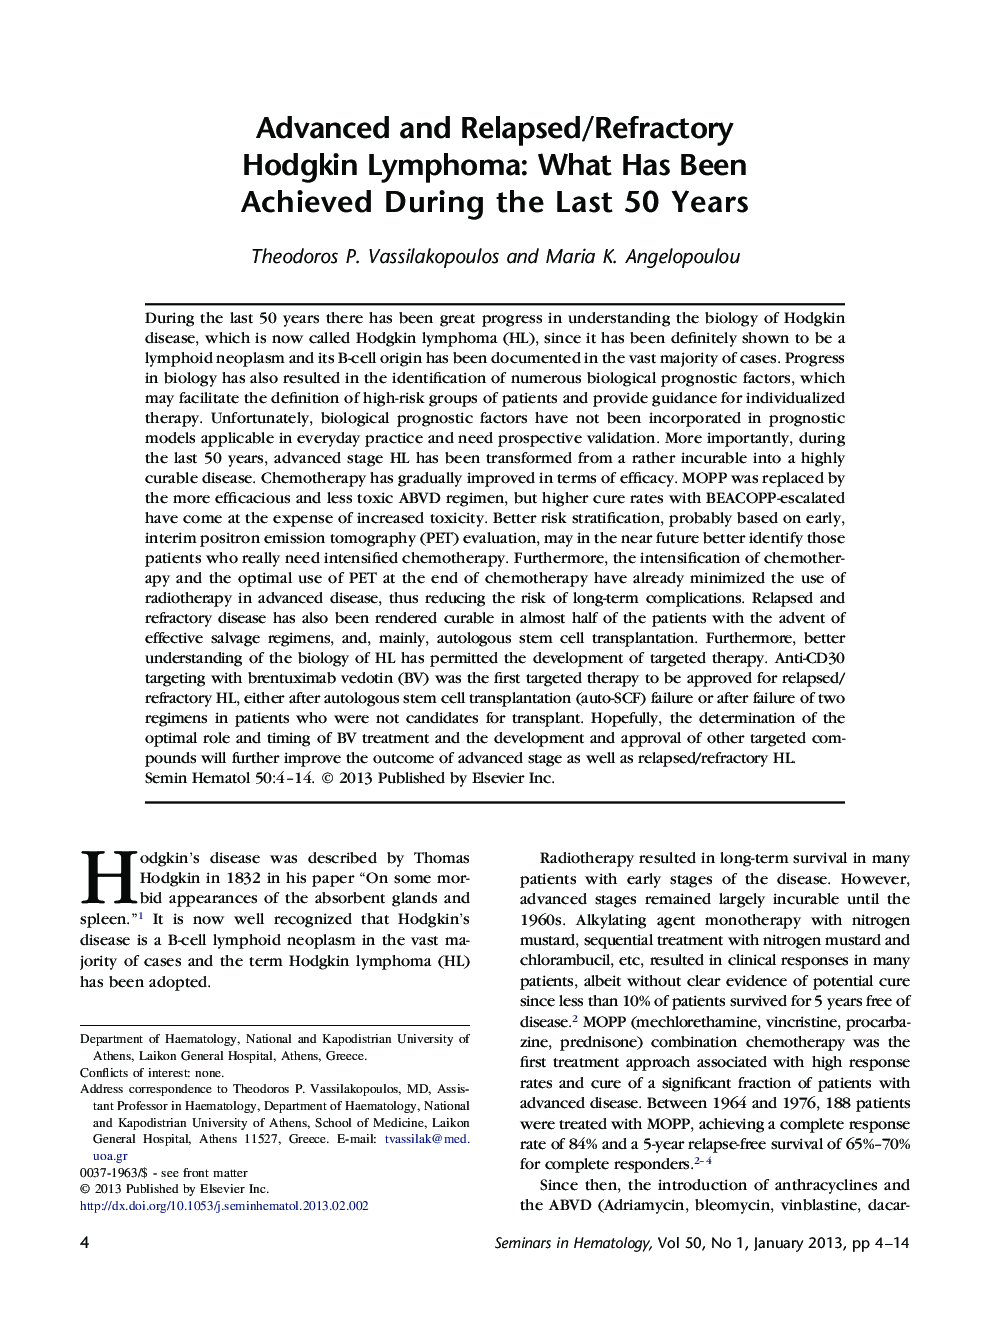 Advanced and Relapsed/Refractory Hodgkin Lymphoma: What Has Been Achieved During the Last 50 Years